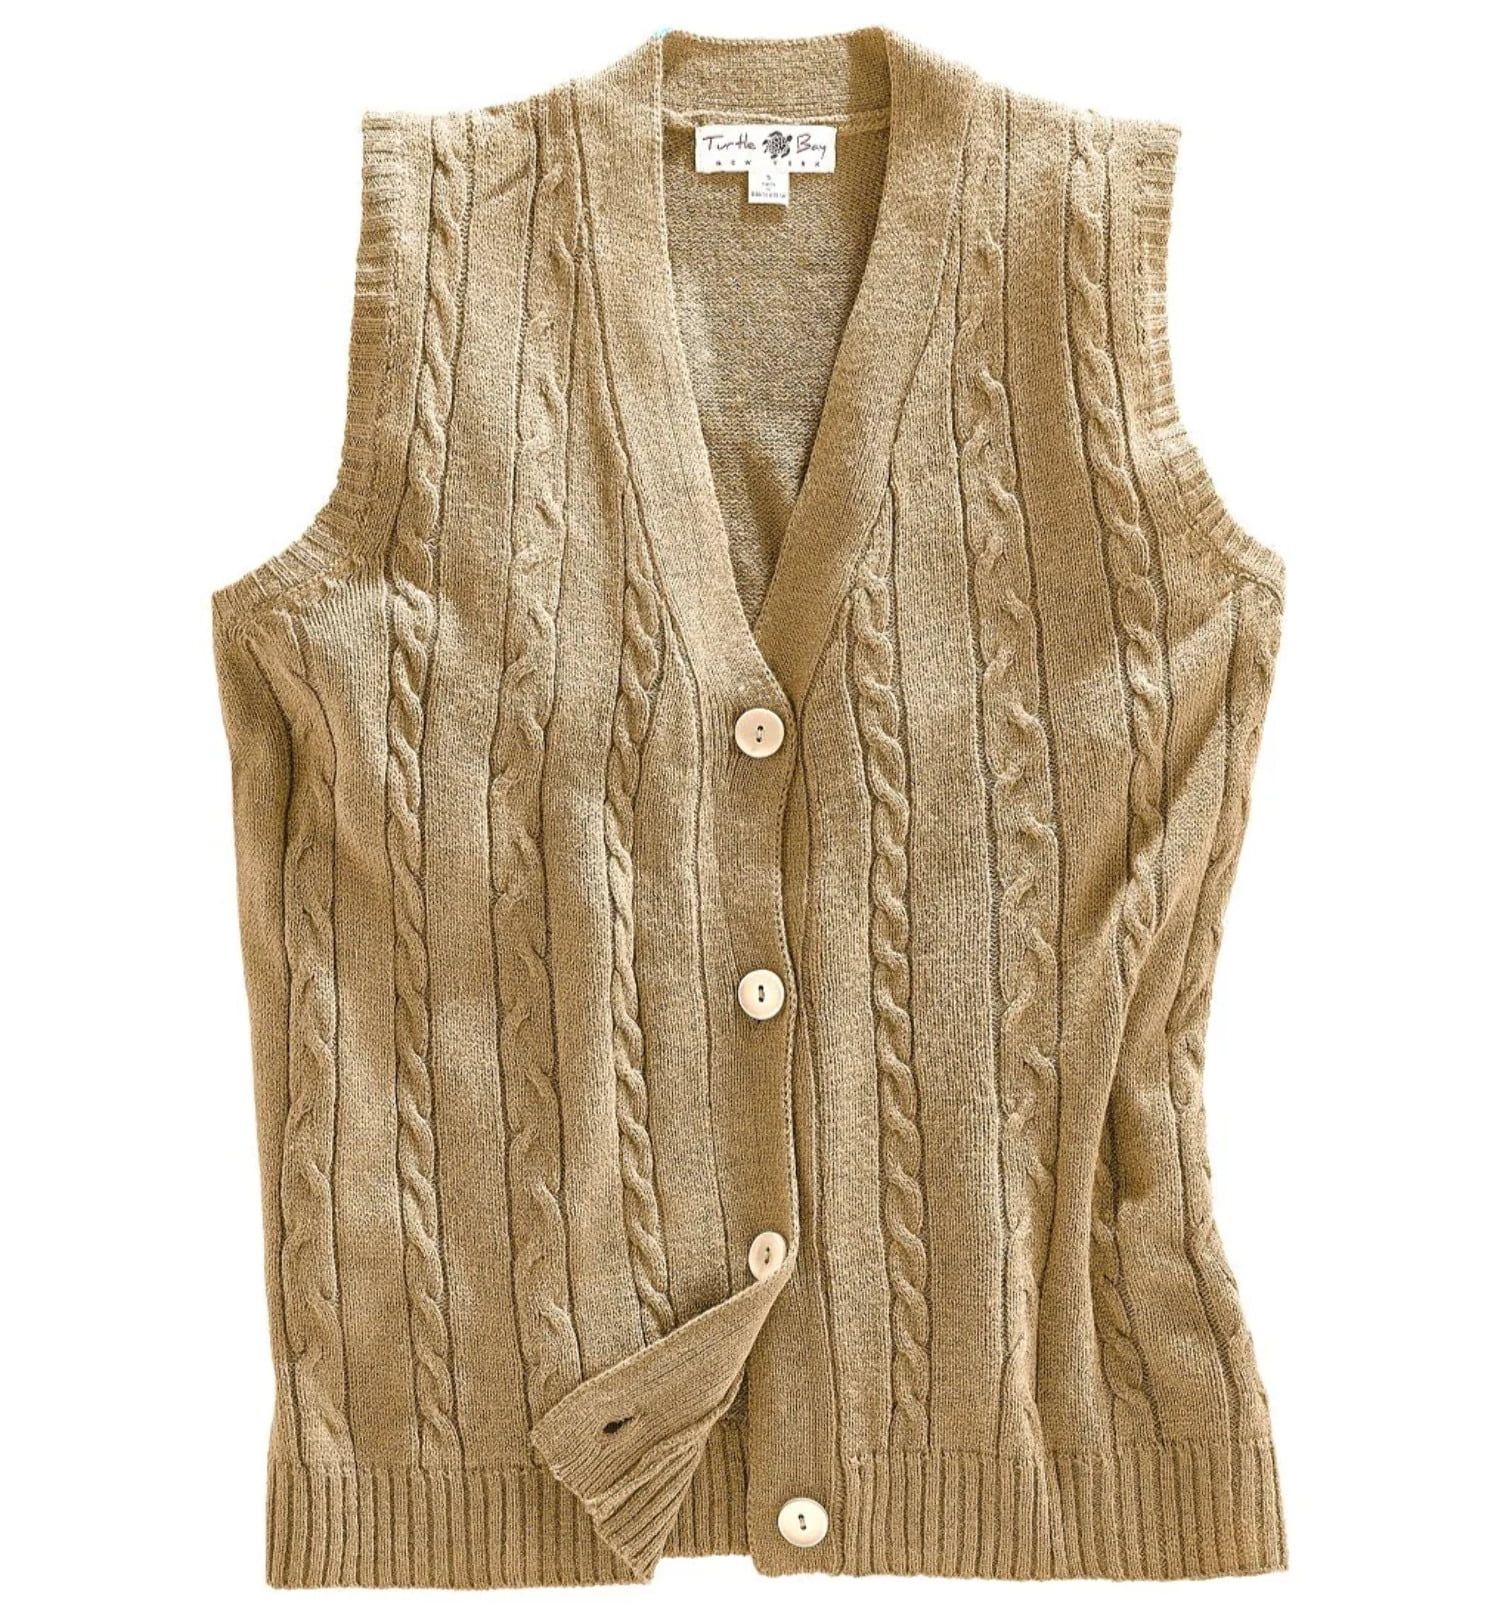 Women's Button Front Cable Cardigan Sweater Vest – Button Up Styling in a Timeless Cable Knit | Walmart (US)